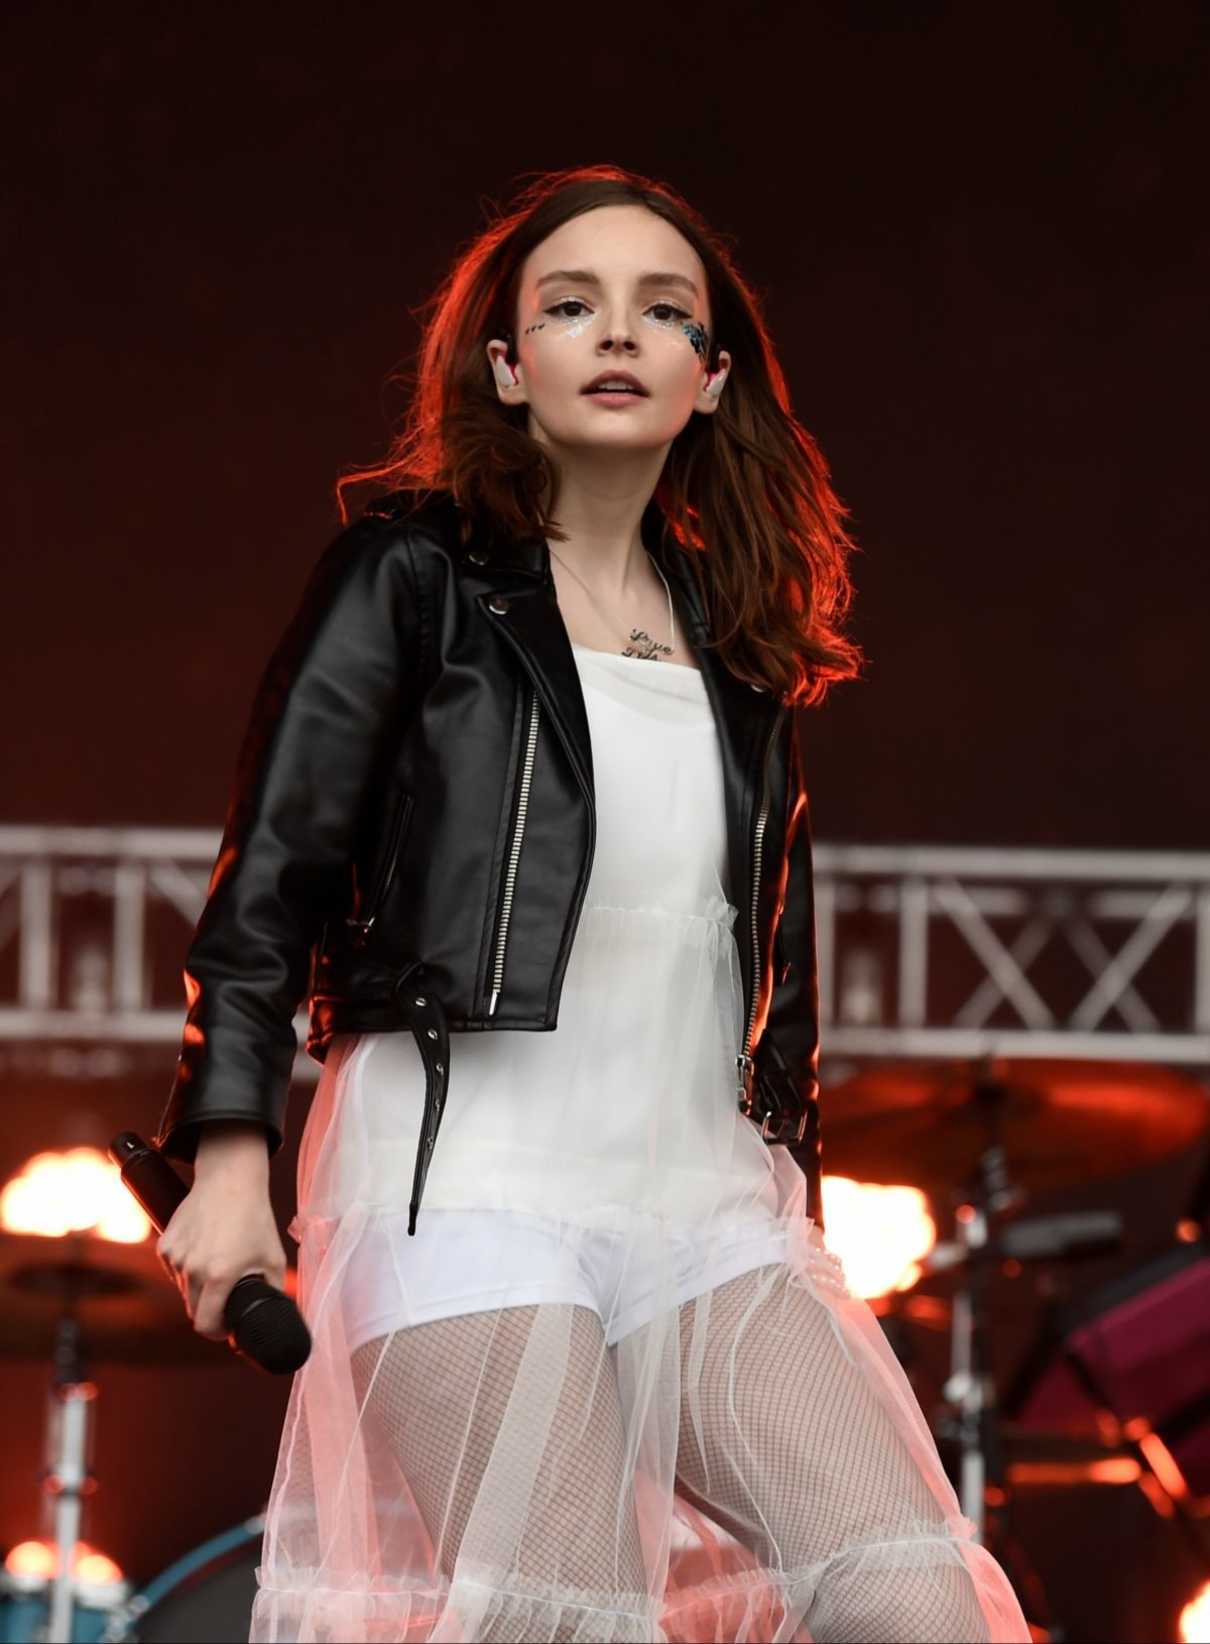 Lauren Mayberry Performs During the Parklife Festival at Heaton Park in Manchester 06/10/2018-3